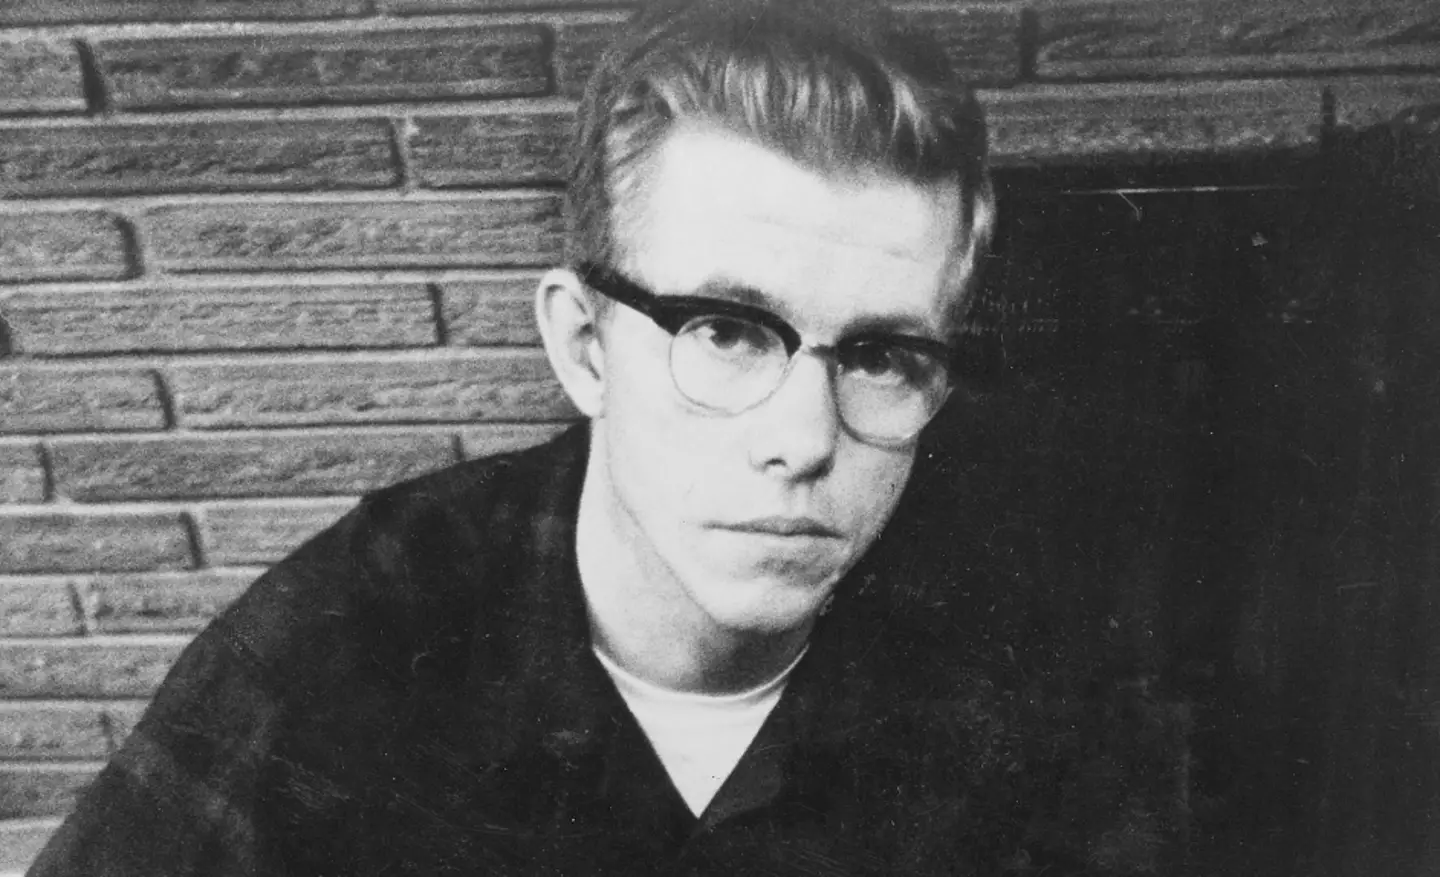 In the 1970s and 80s, Robert Hansen tortured, raped and killed at least 17 women.